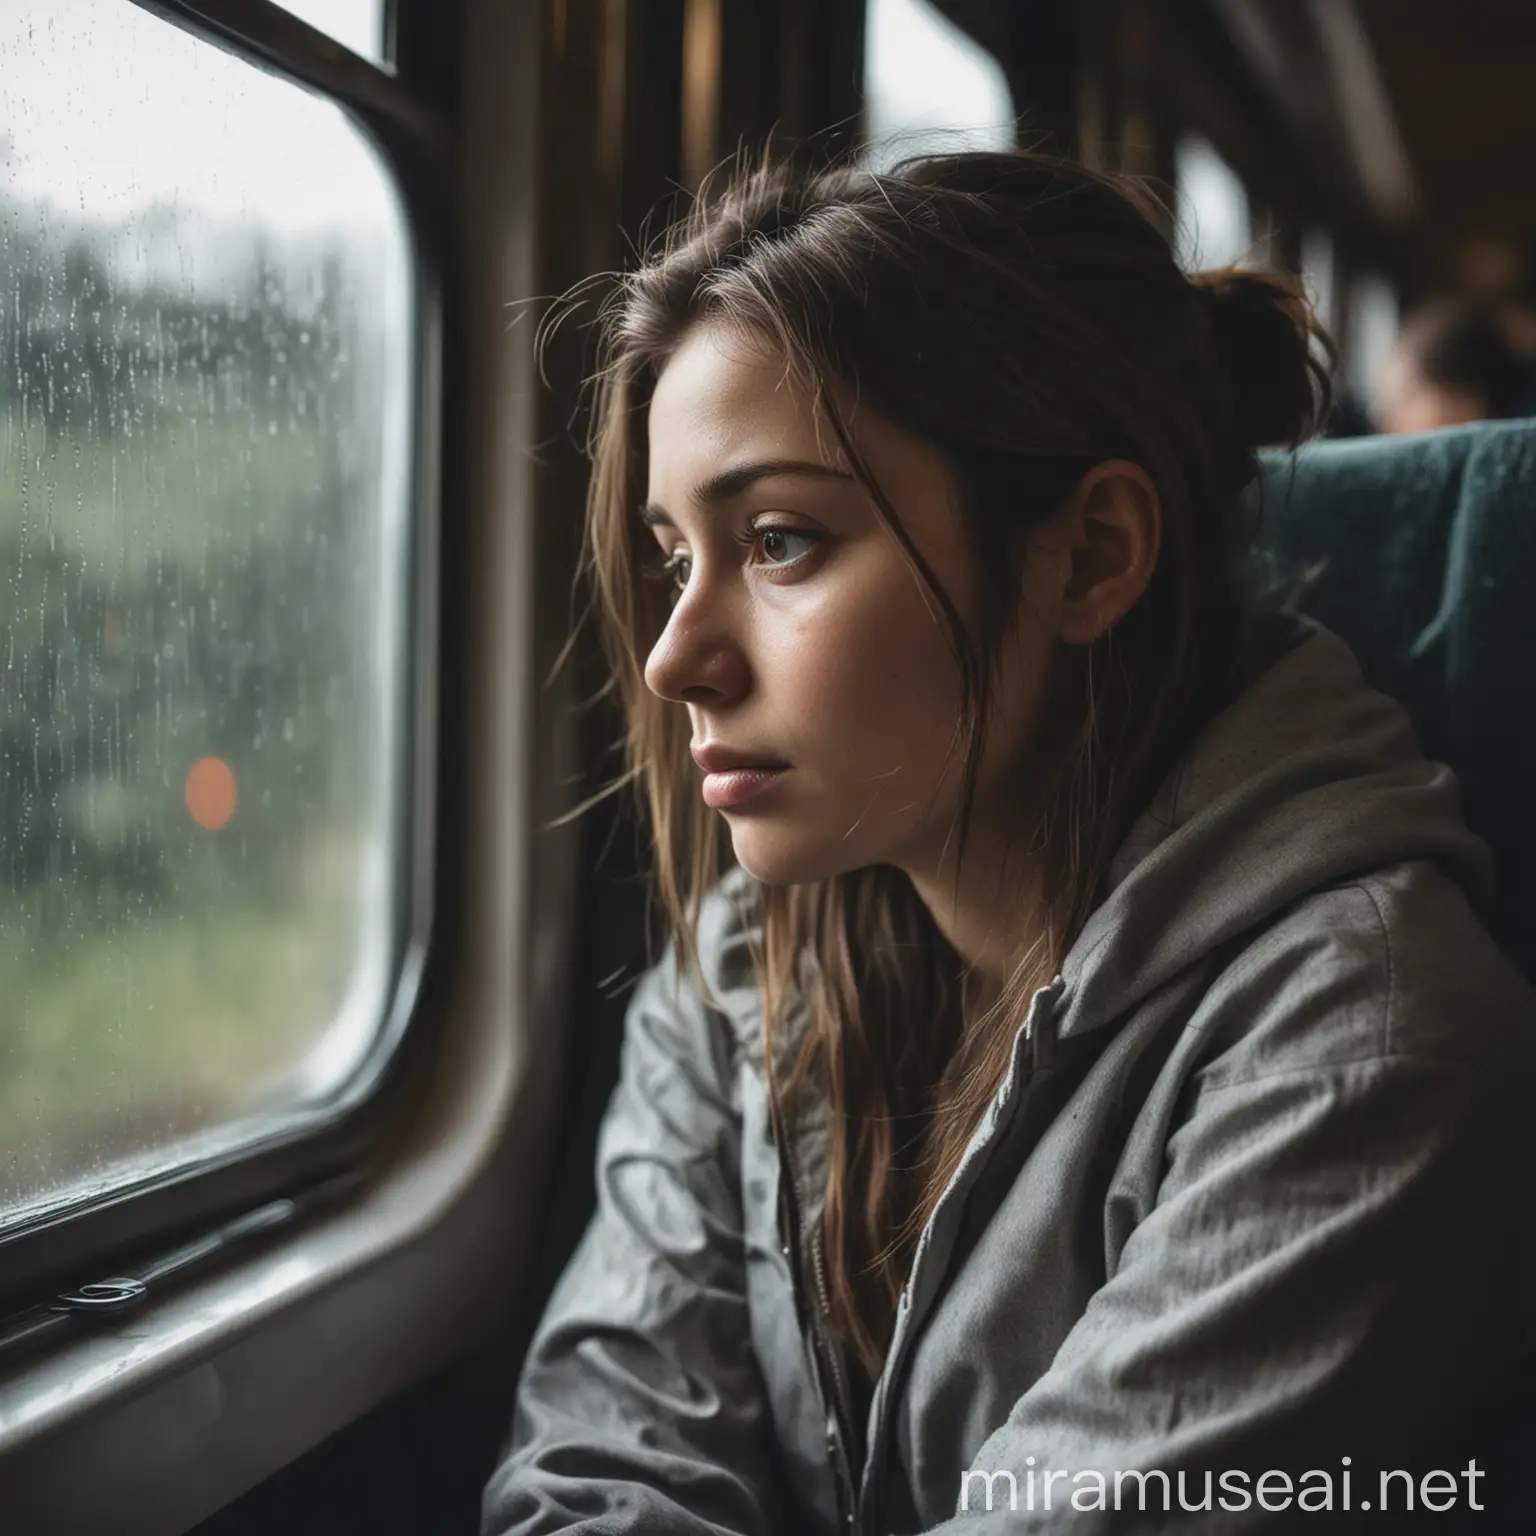 Lonely Passenger Reflecting on a Dreary Train Journey